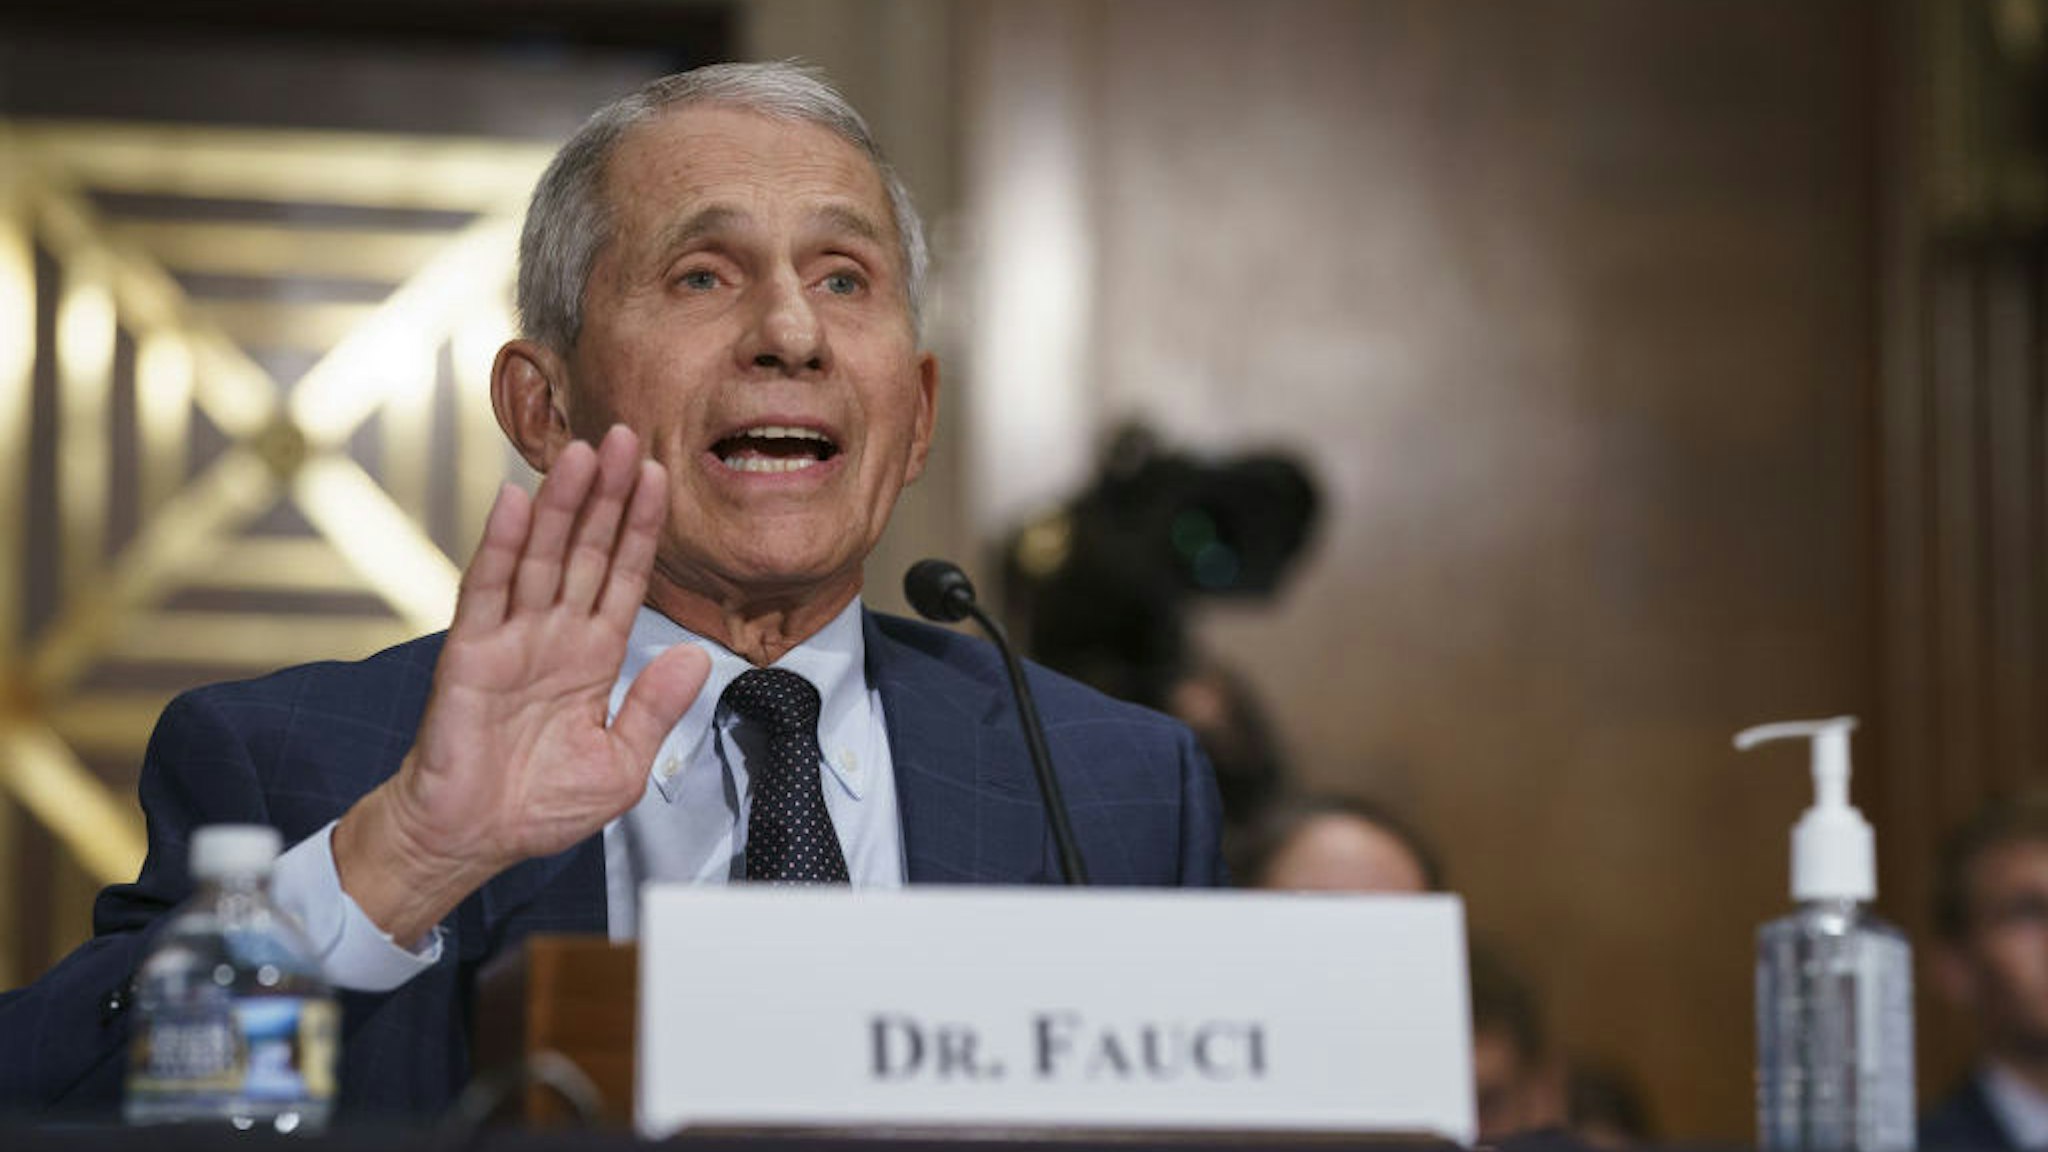 Anthony Fauci, director of the National Institute of Allergy and Infectious Diseases, speaks during a Senate Health, Education, Labor, and Pensions Committee confirmation hearing in Washington, D.C., U.S., on Tuesday, July 20, 2021. The top U.S. infectious-disease expert yesterday said the delta variant of the coronavirus is causing a significant increase in infections and the Biden administration is "practically pleading" with people to get vaccinated. Photographer: J. Scott Applewhite/AP Photo/Bloomberg